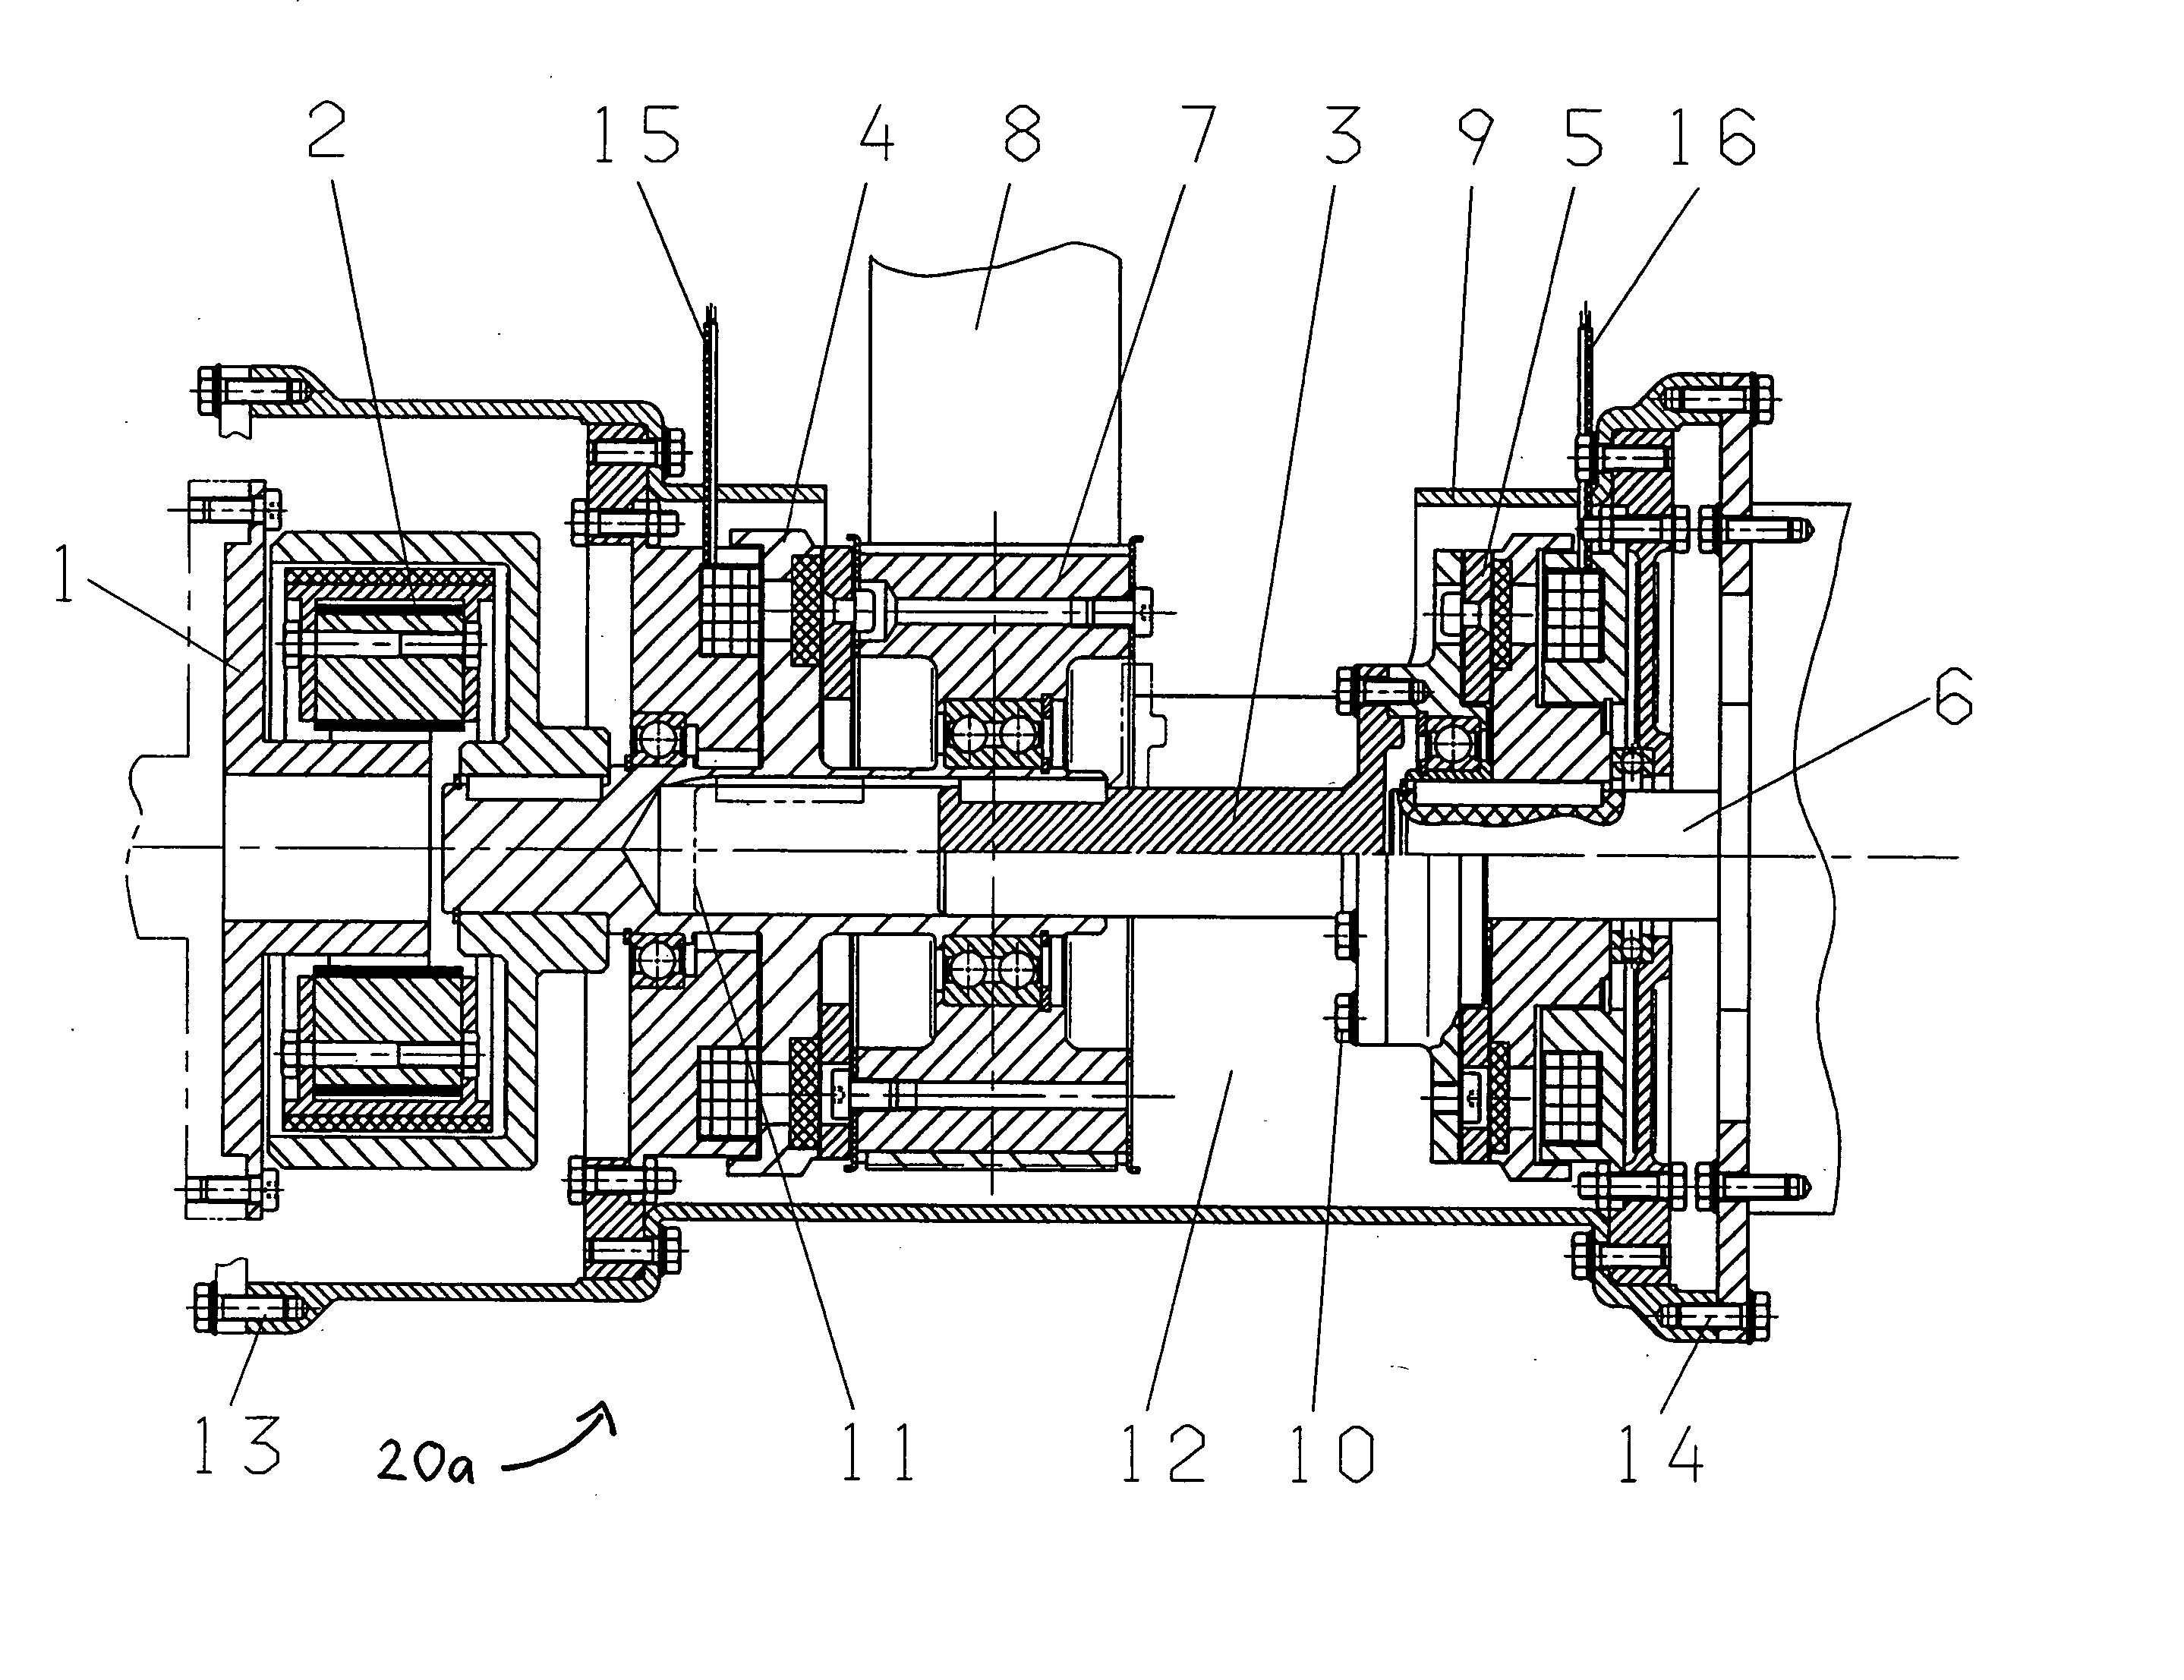 Mobile, self-sufficient operating assembly for providing electrical energy